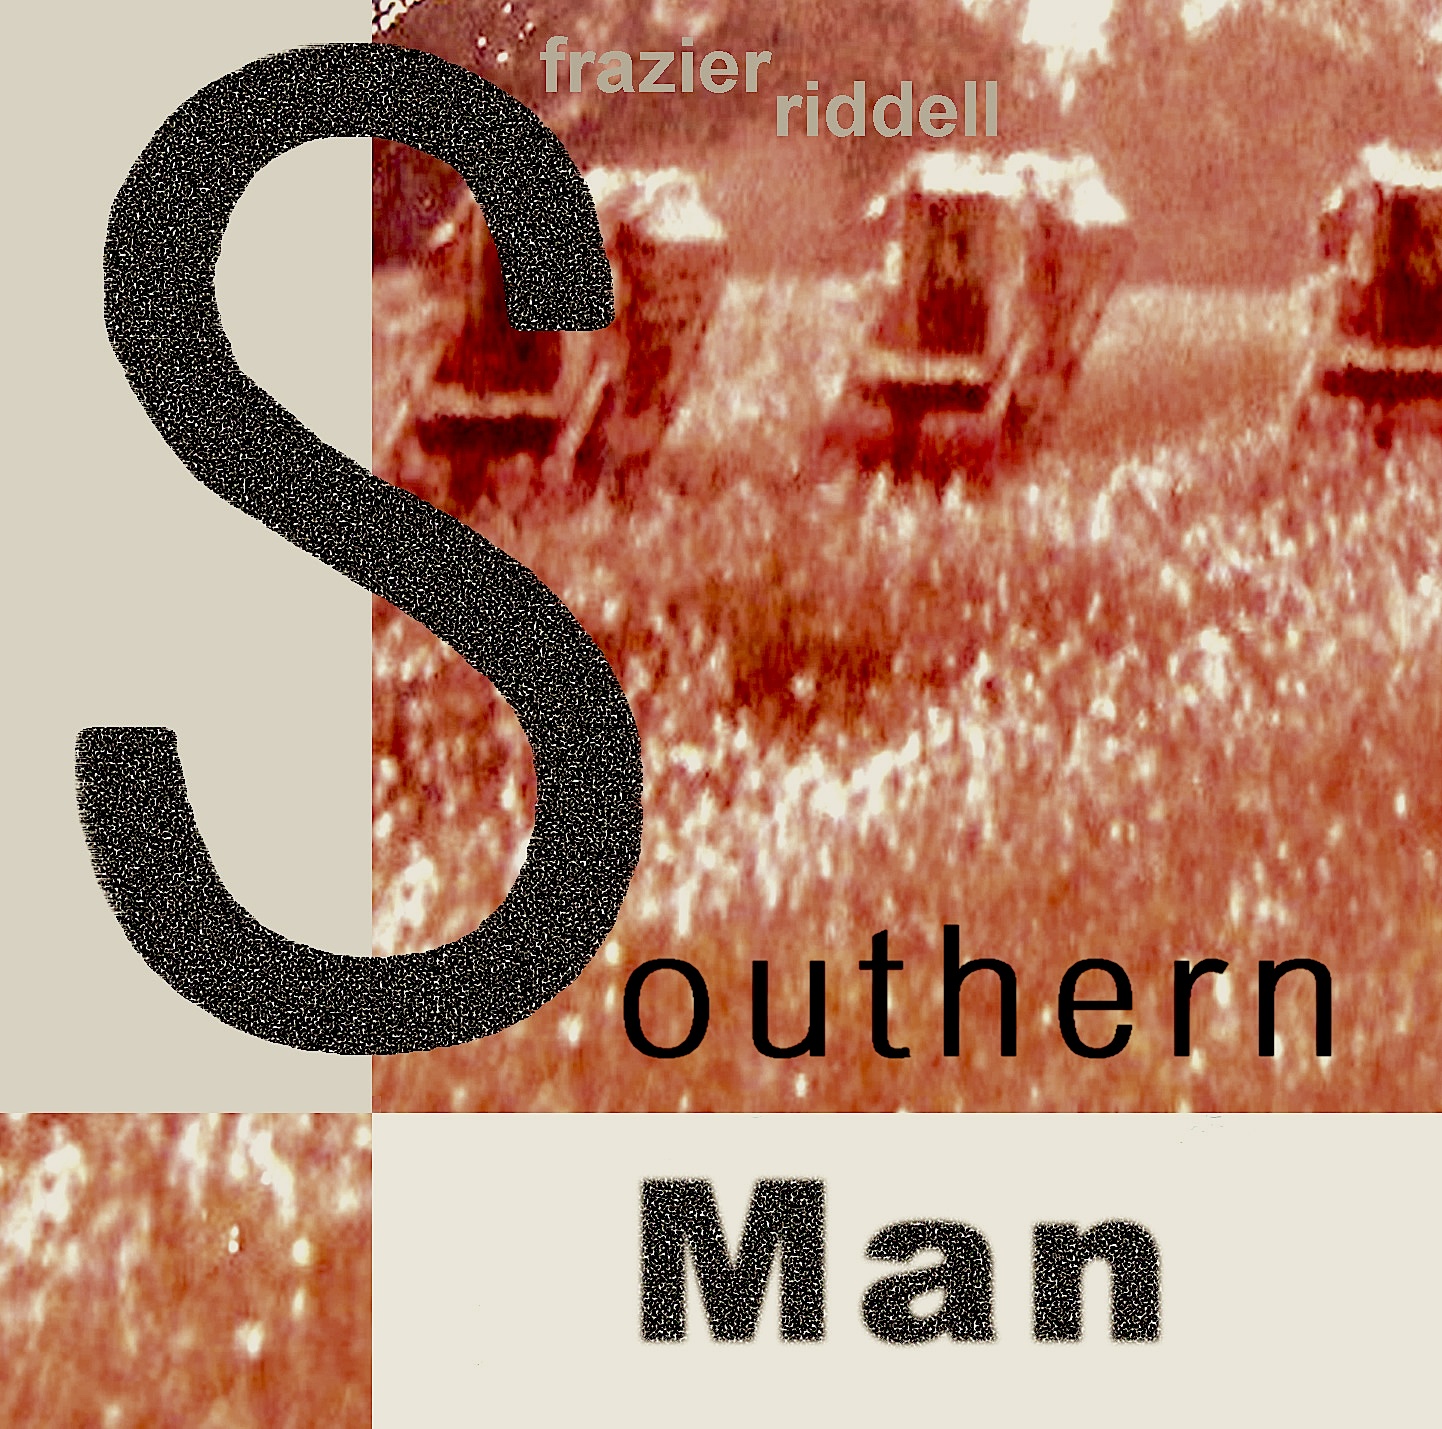 Southern Man Private